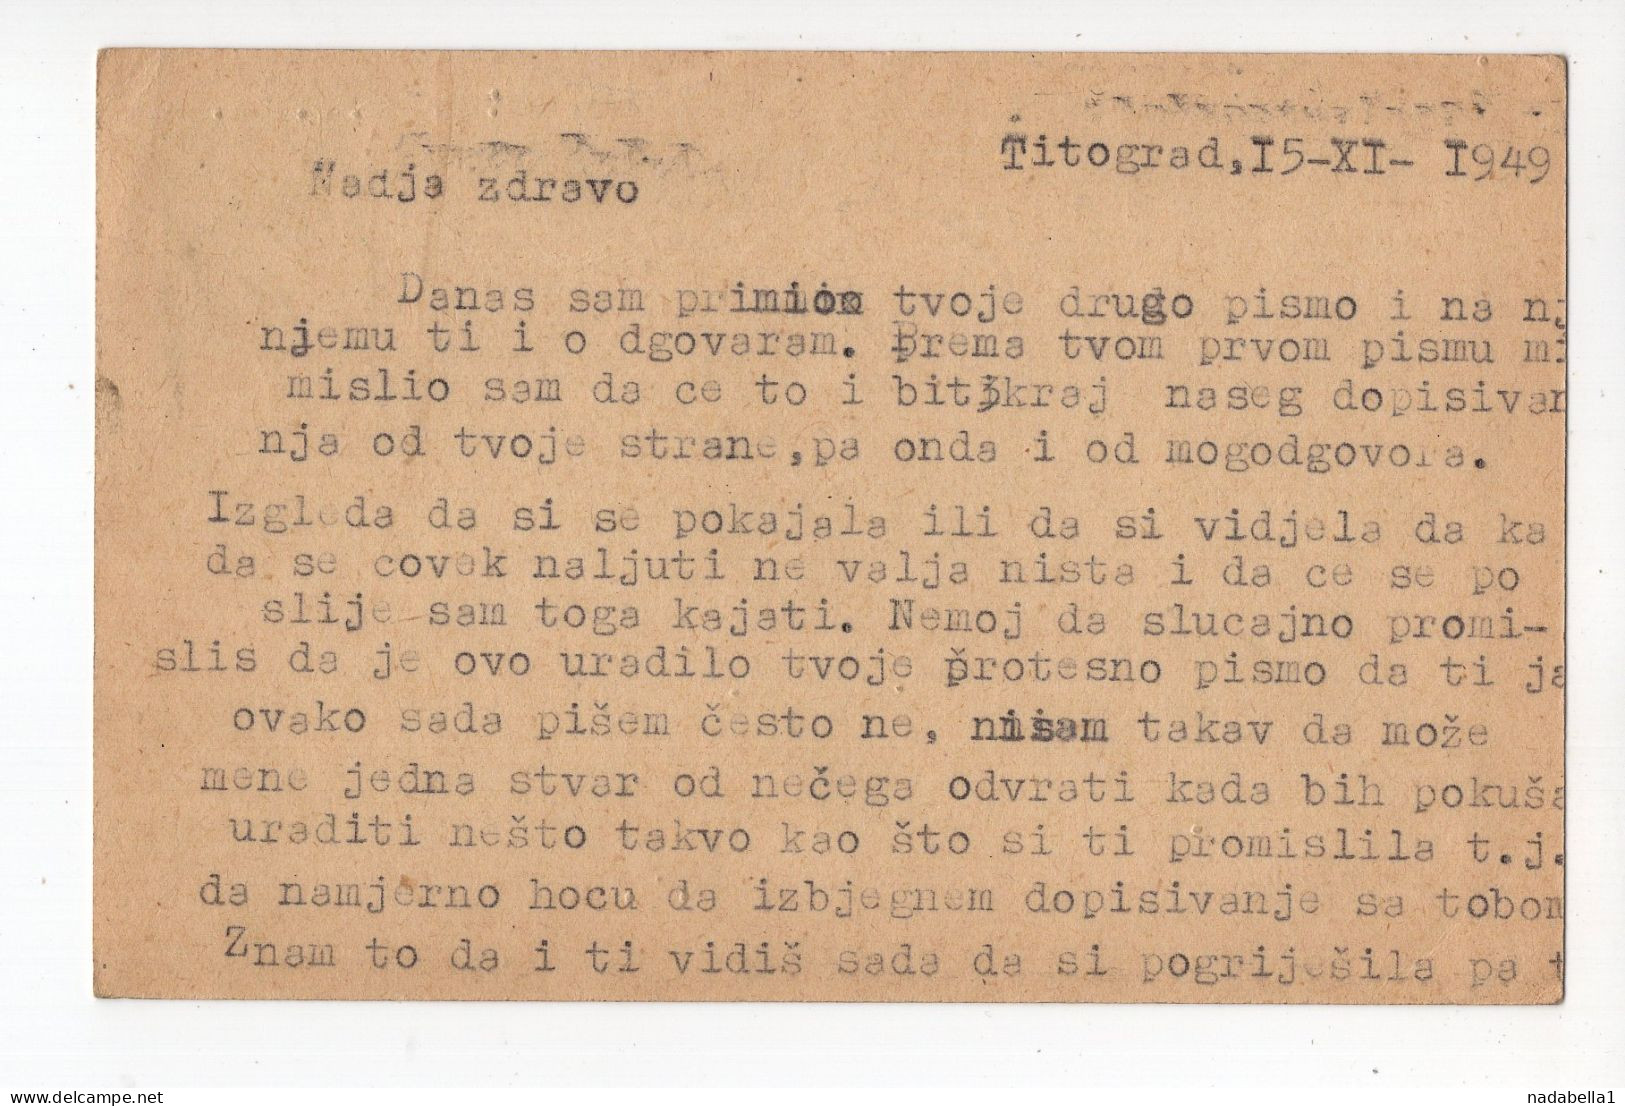 1949. YUGOSLAVIA,MONTENEGRO,TITOGRAD,2 DIN POSTAGE DUE IN BELGRADE,2 DIN STATIONERY CARD,USED - Postage Due